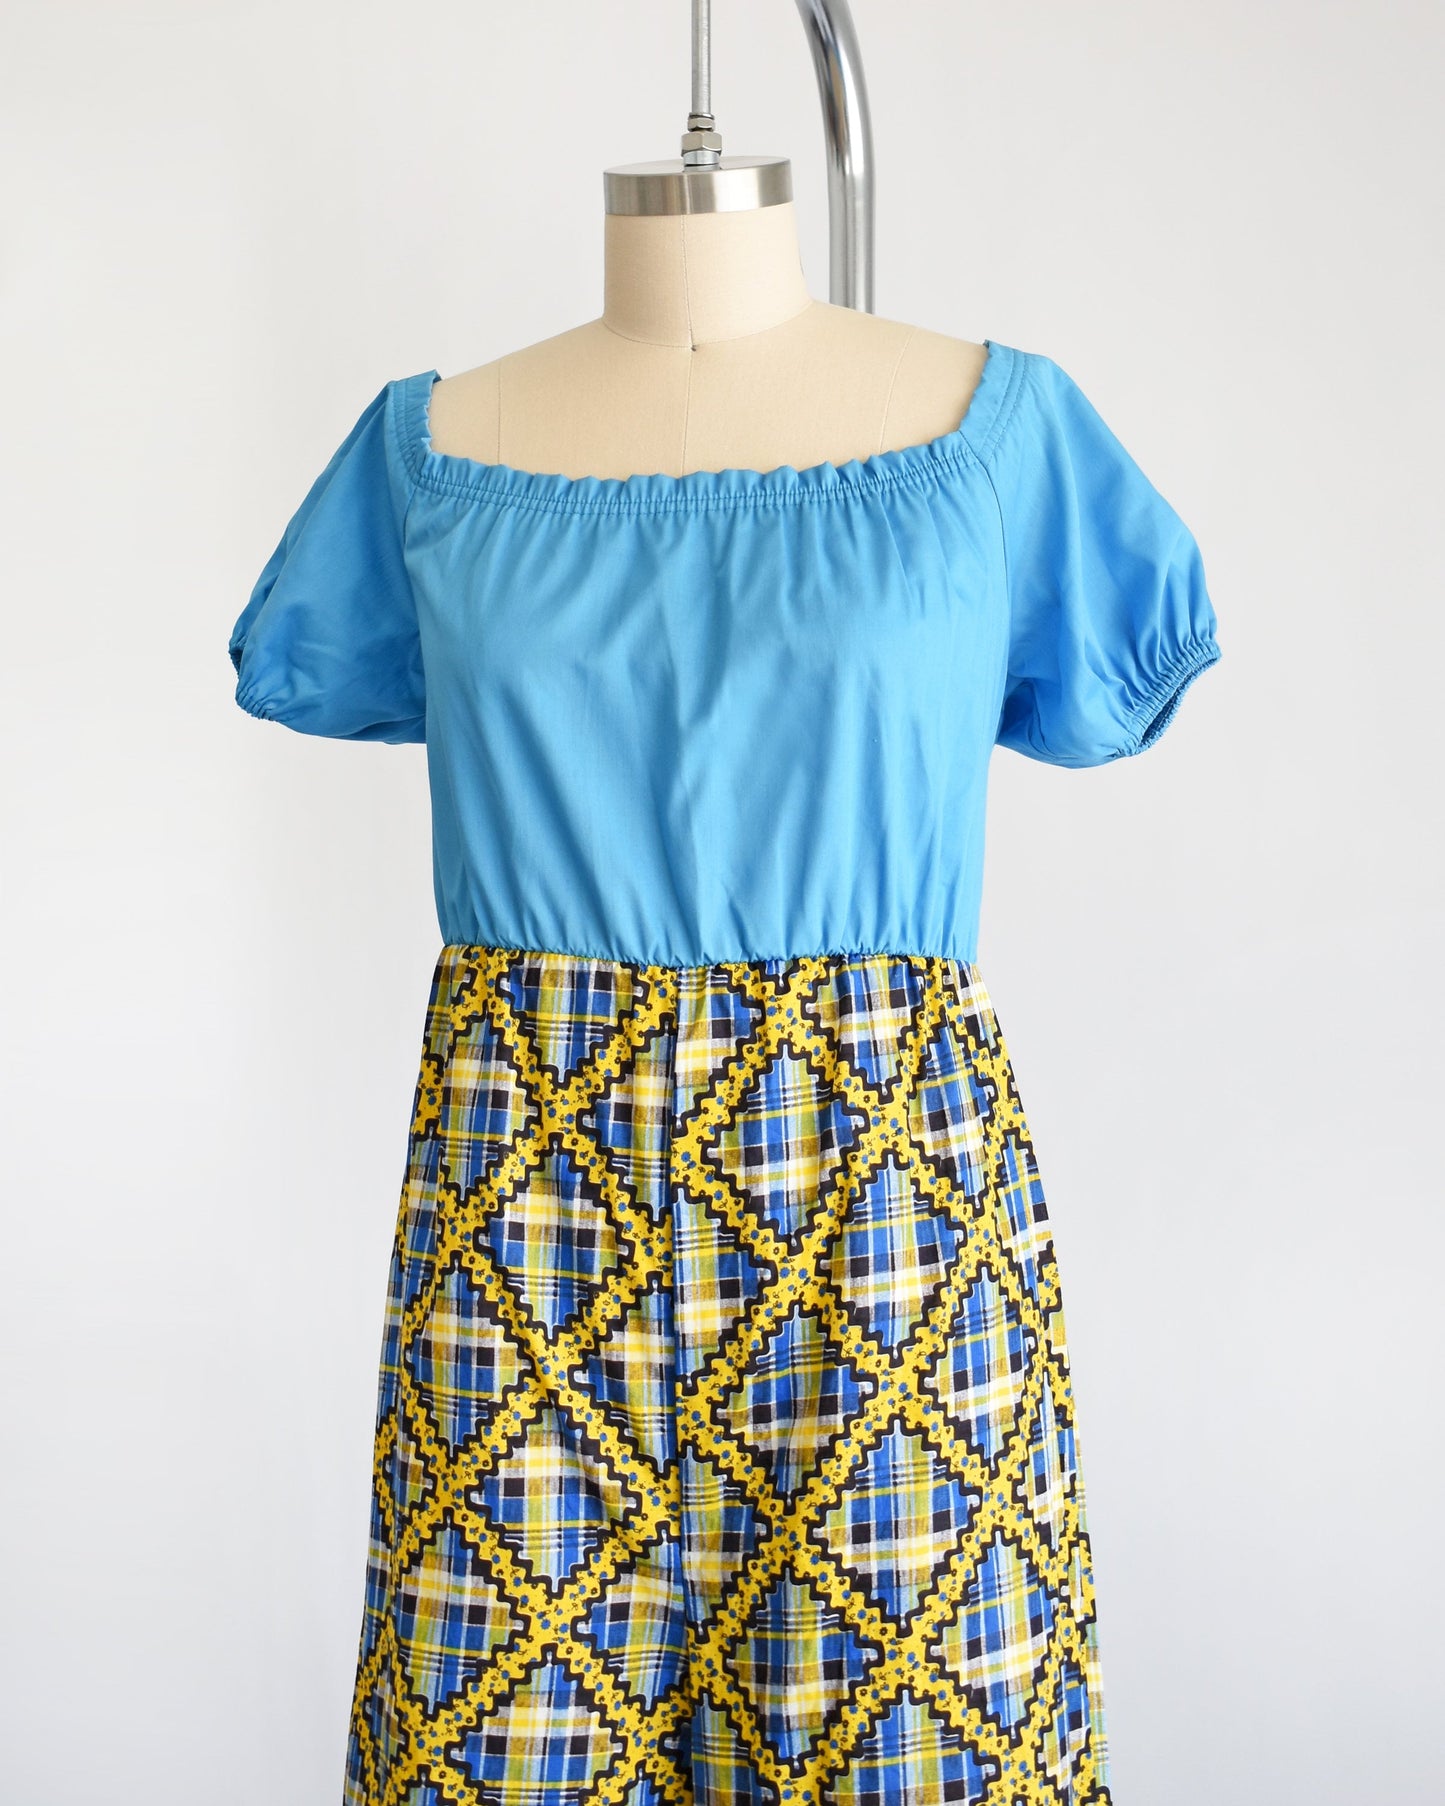 Side front view of a vintage 70s jumpsuit that has a blue bodice with smocked elastic neckline and puff sleeves. The pants are a blue, black, and yellow plaid, with a ric-rac dotted yellow and black print on top of the plaid.